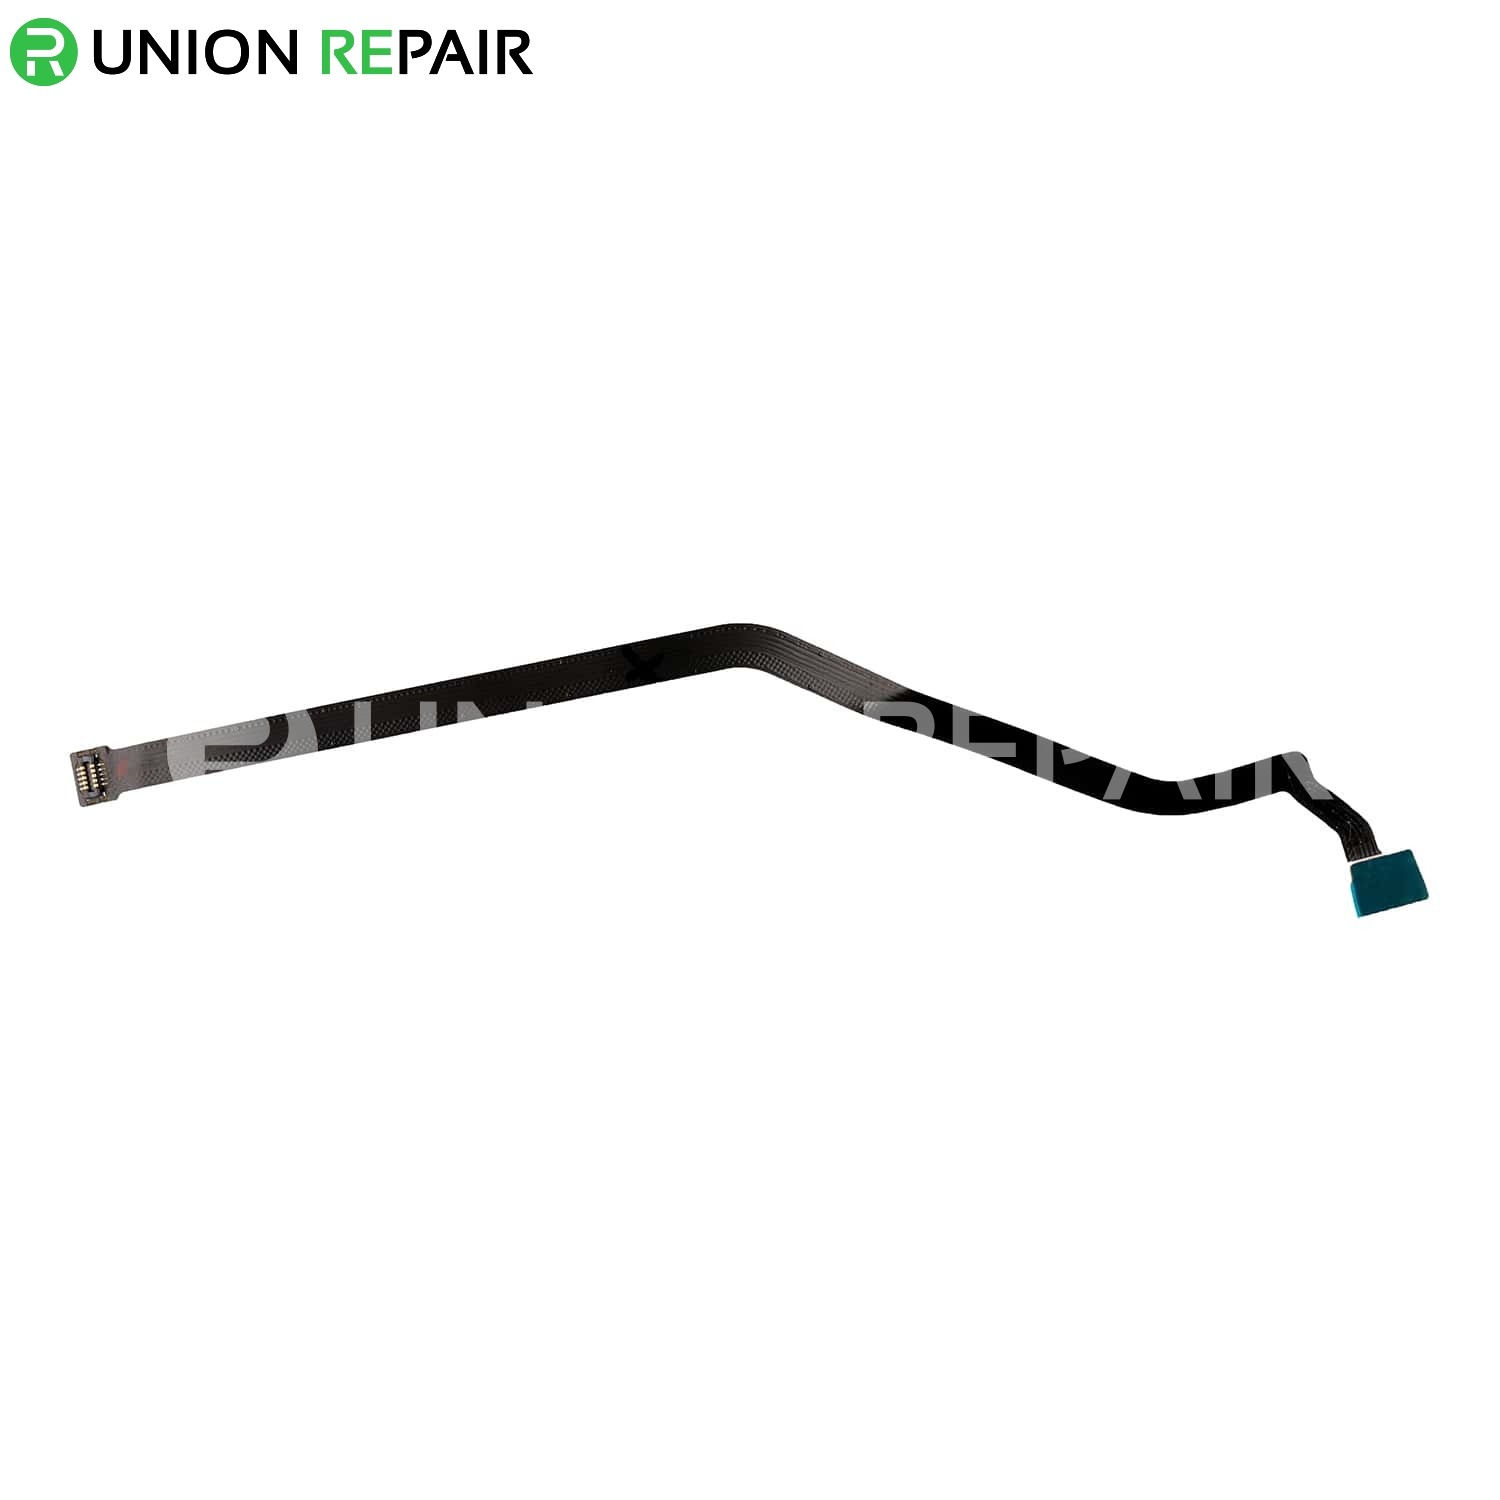 Replacement for Huawei Mate 10 Fingerprint Extension Flex Cable